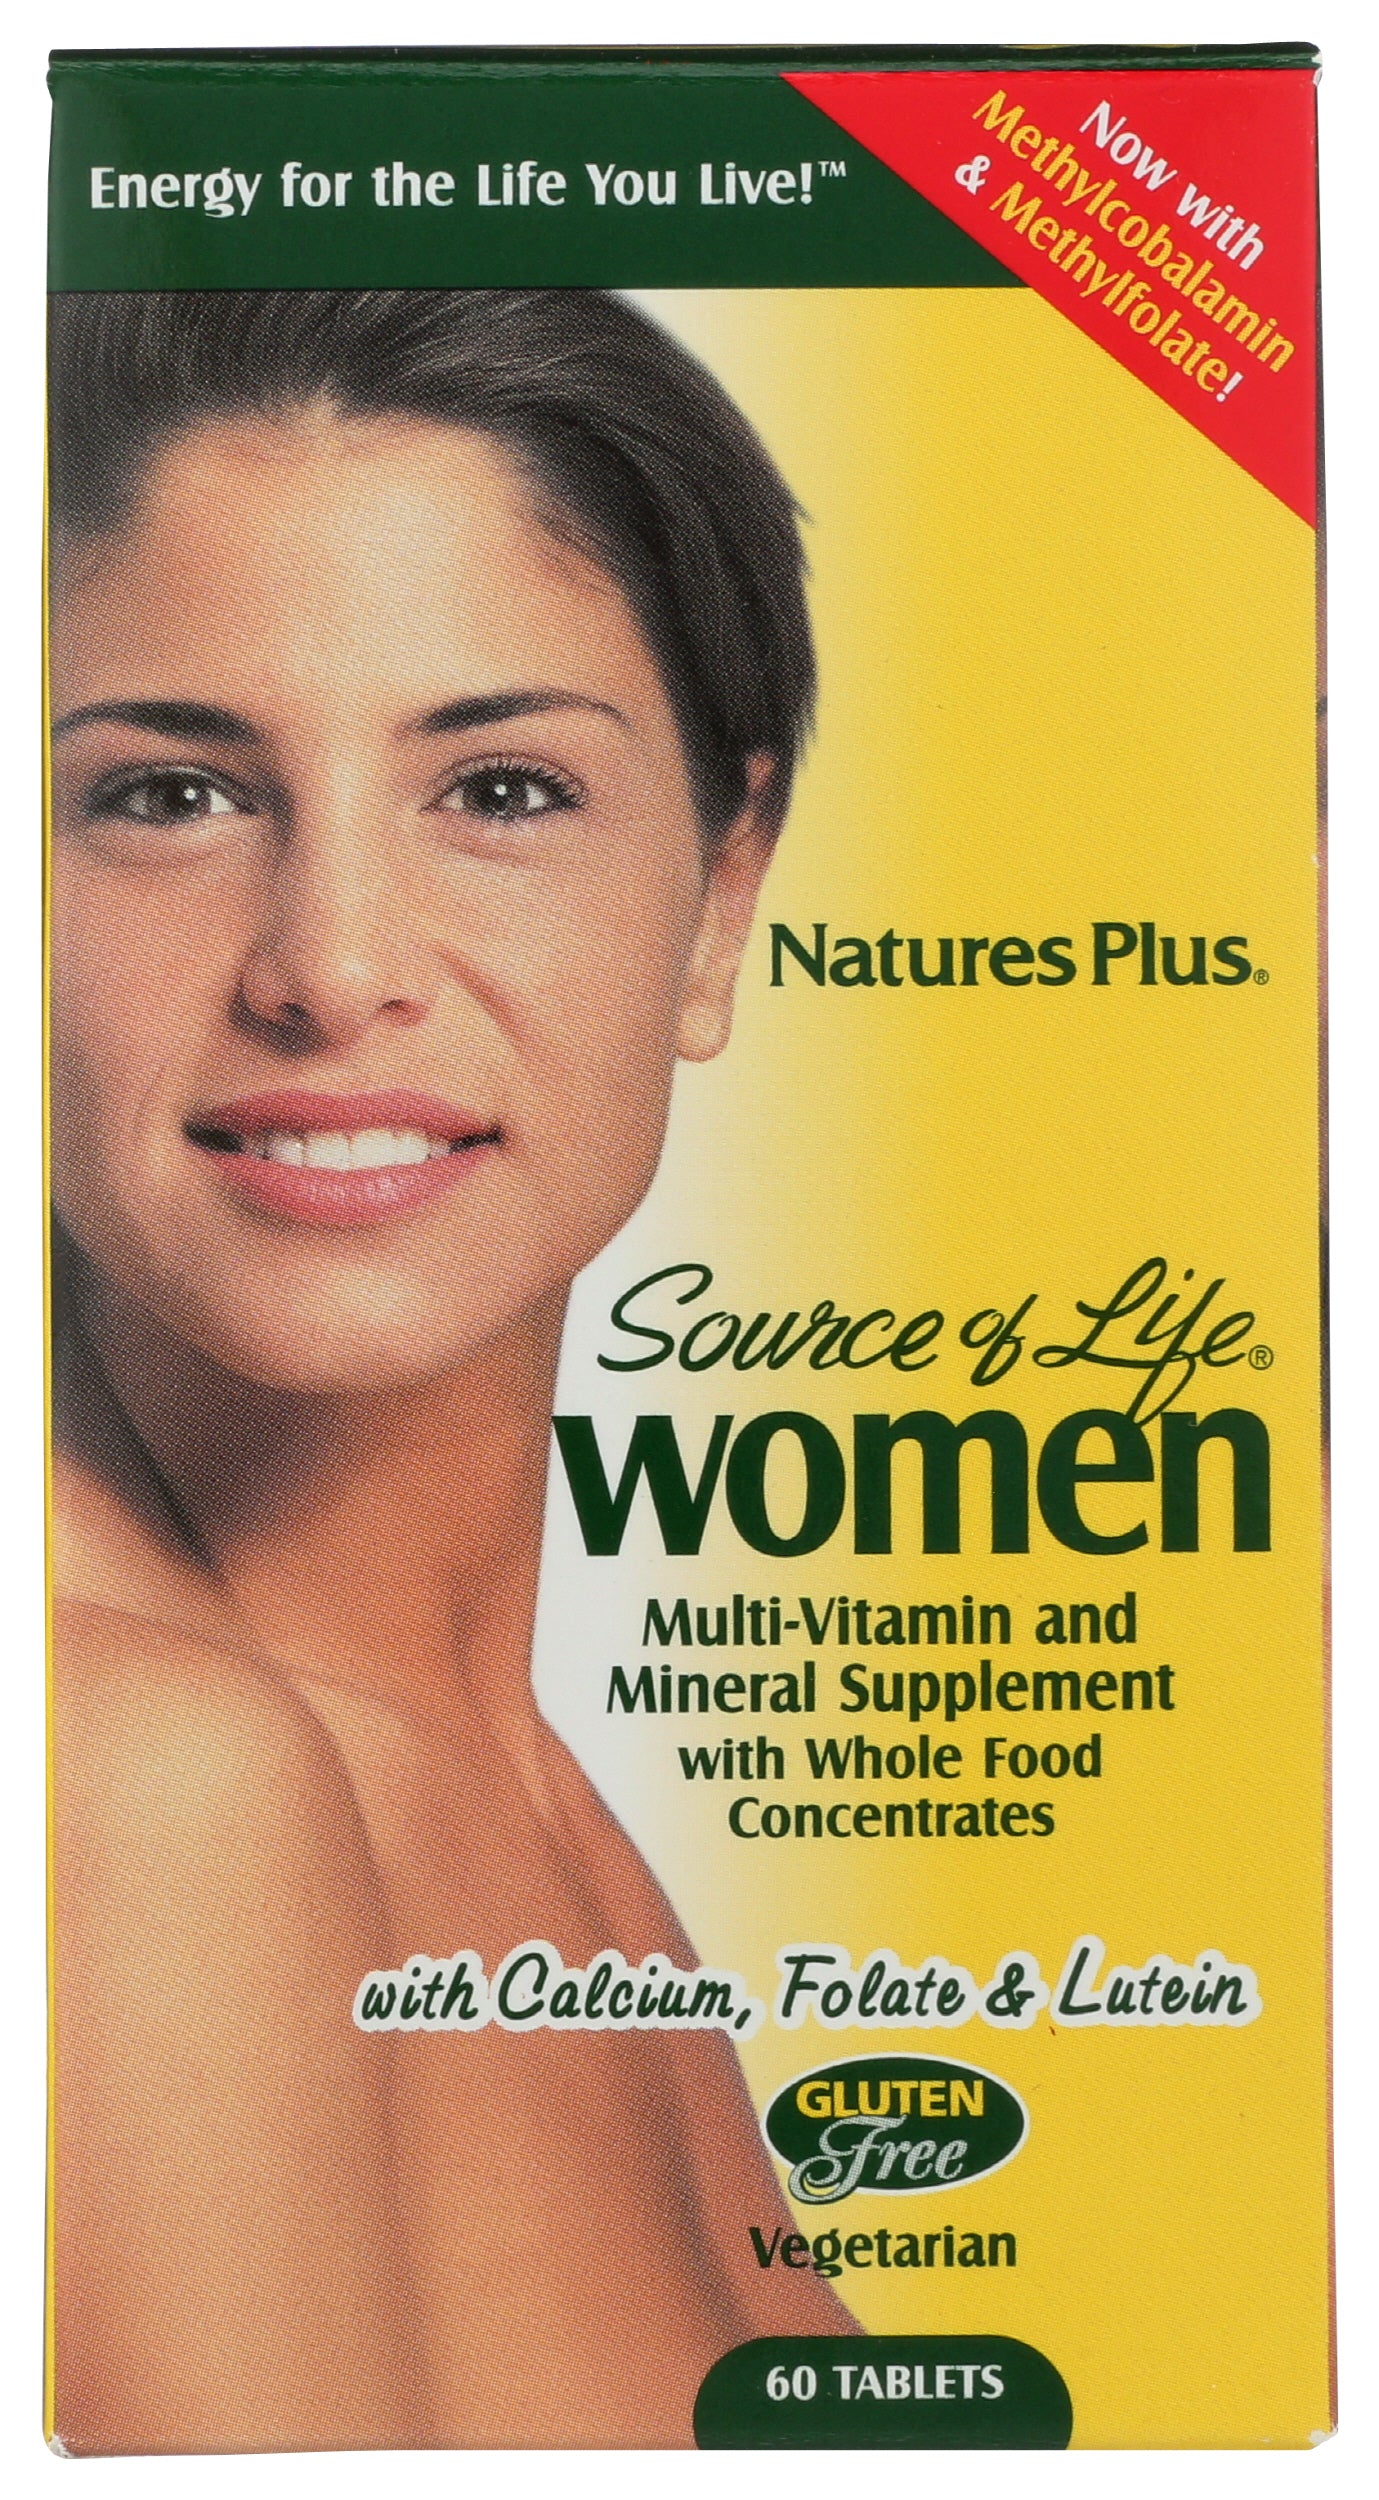 NaturesPlus Source of Life Women Multivitamin 60 Tablets Front of Box